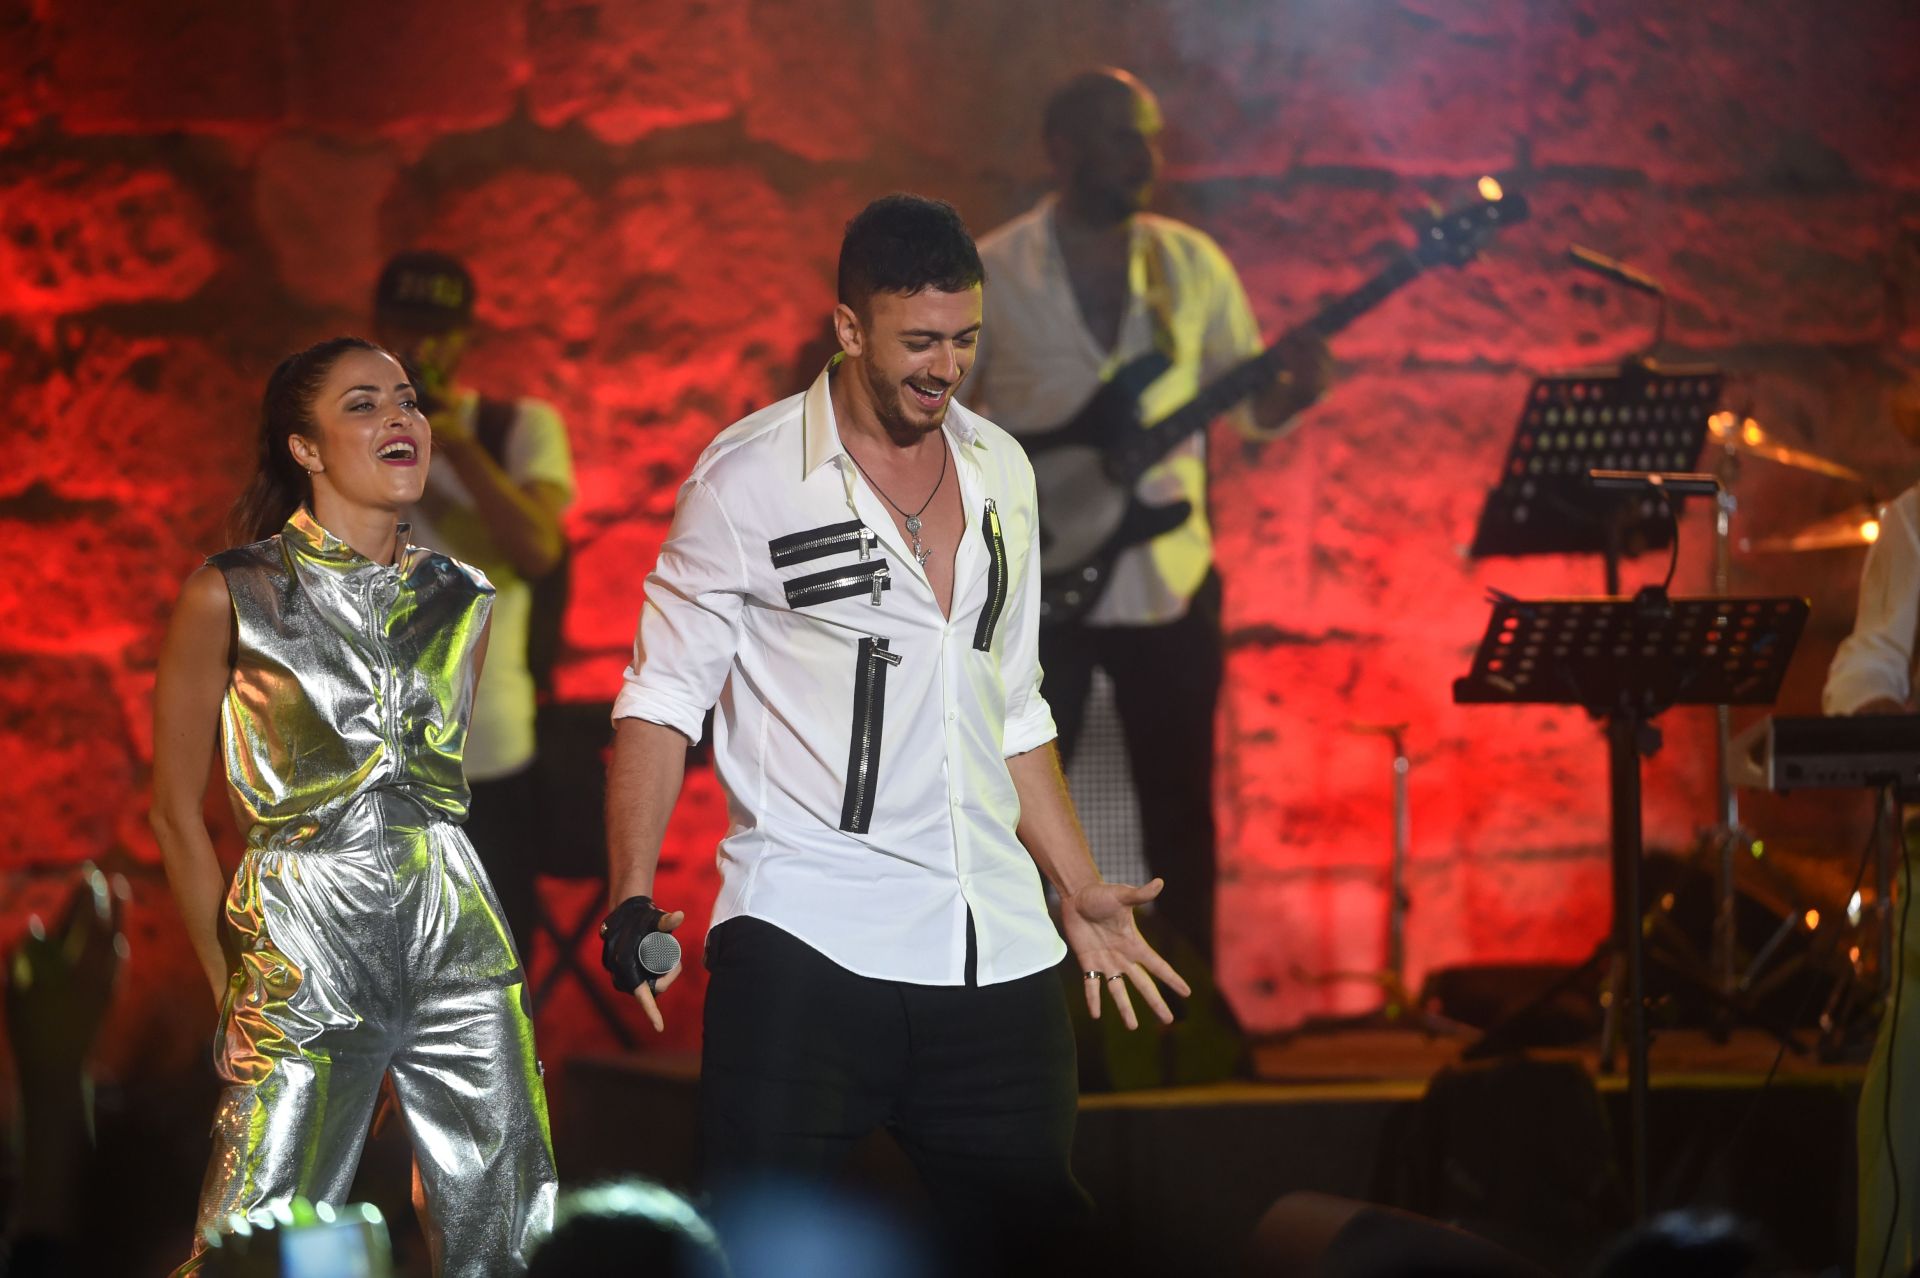 Women’s Rights Groups in Egypt and Lebanon Take Aim at Saad Lamjarred